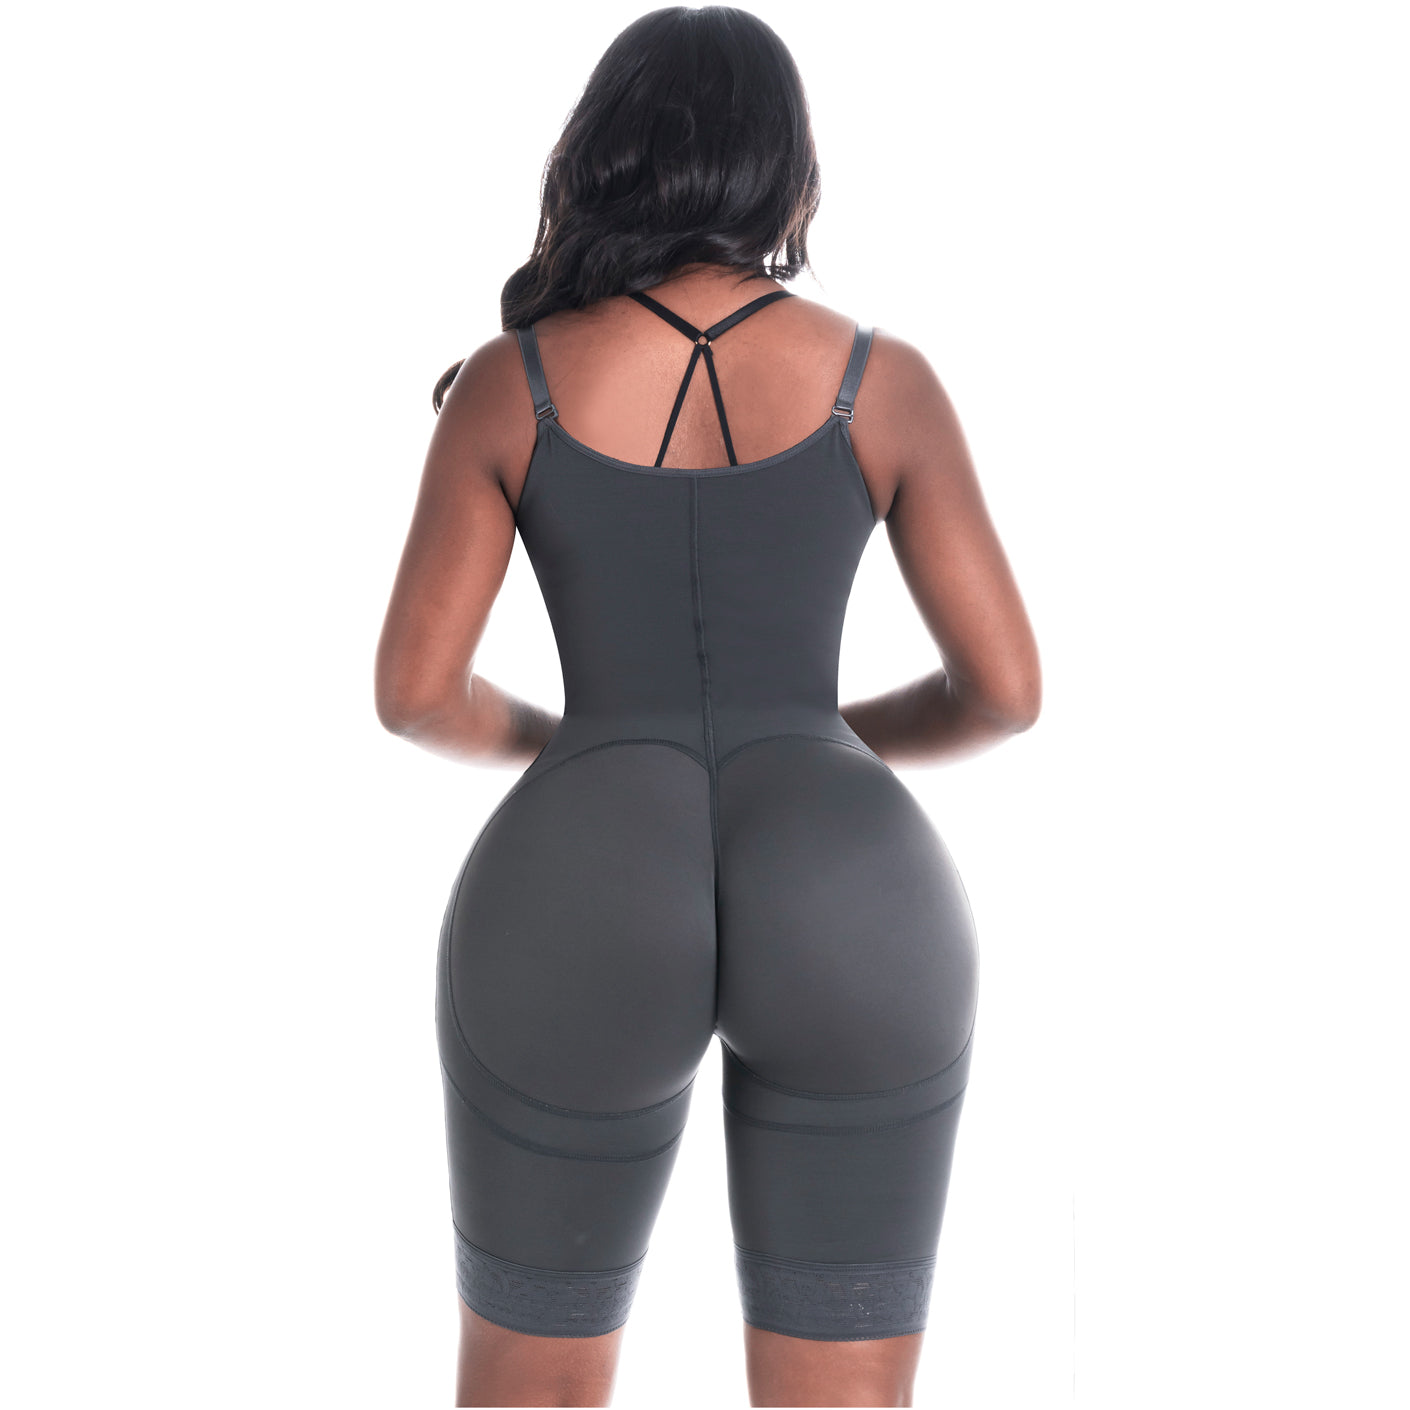 Bling Shapers 573BF, Colombian Butt Lifting Shapewear for Women